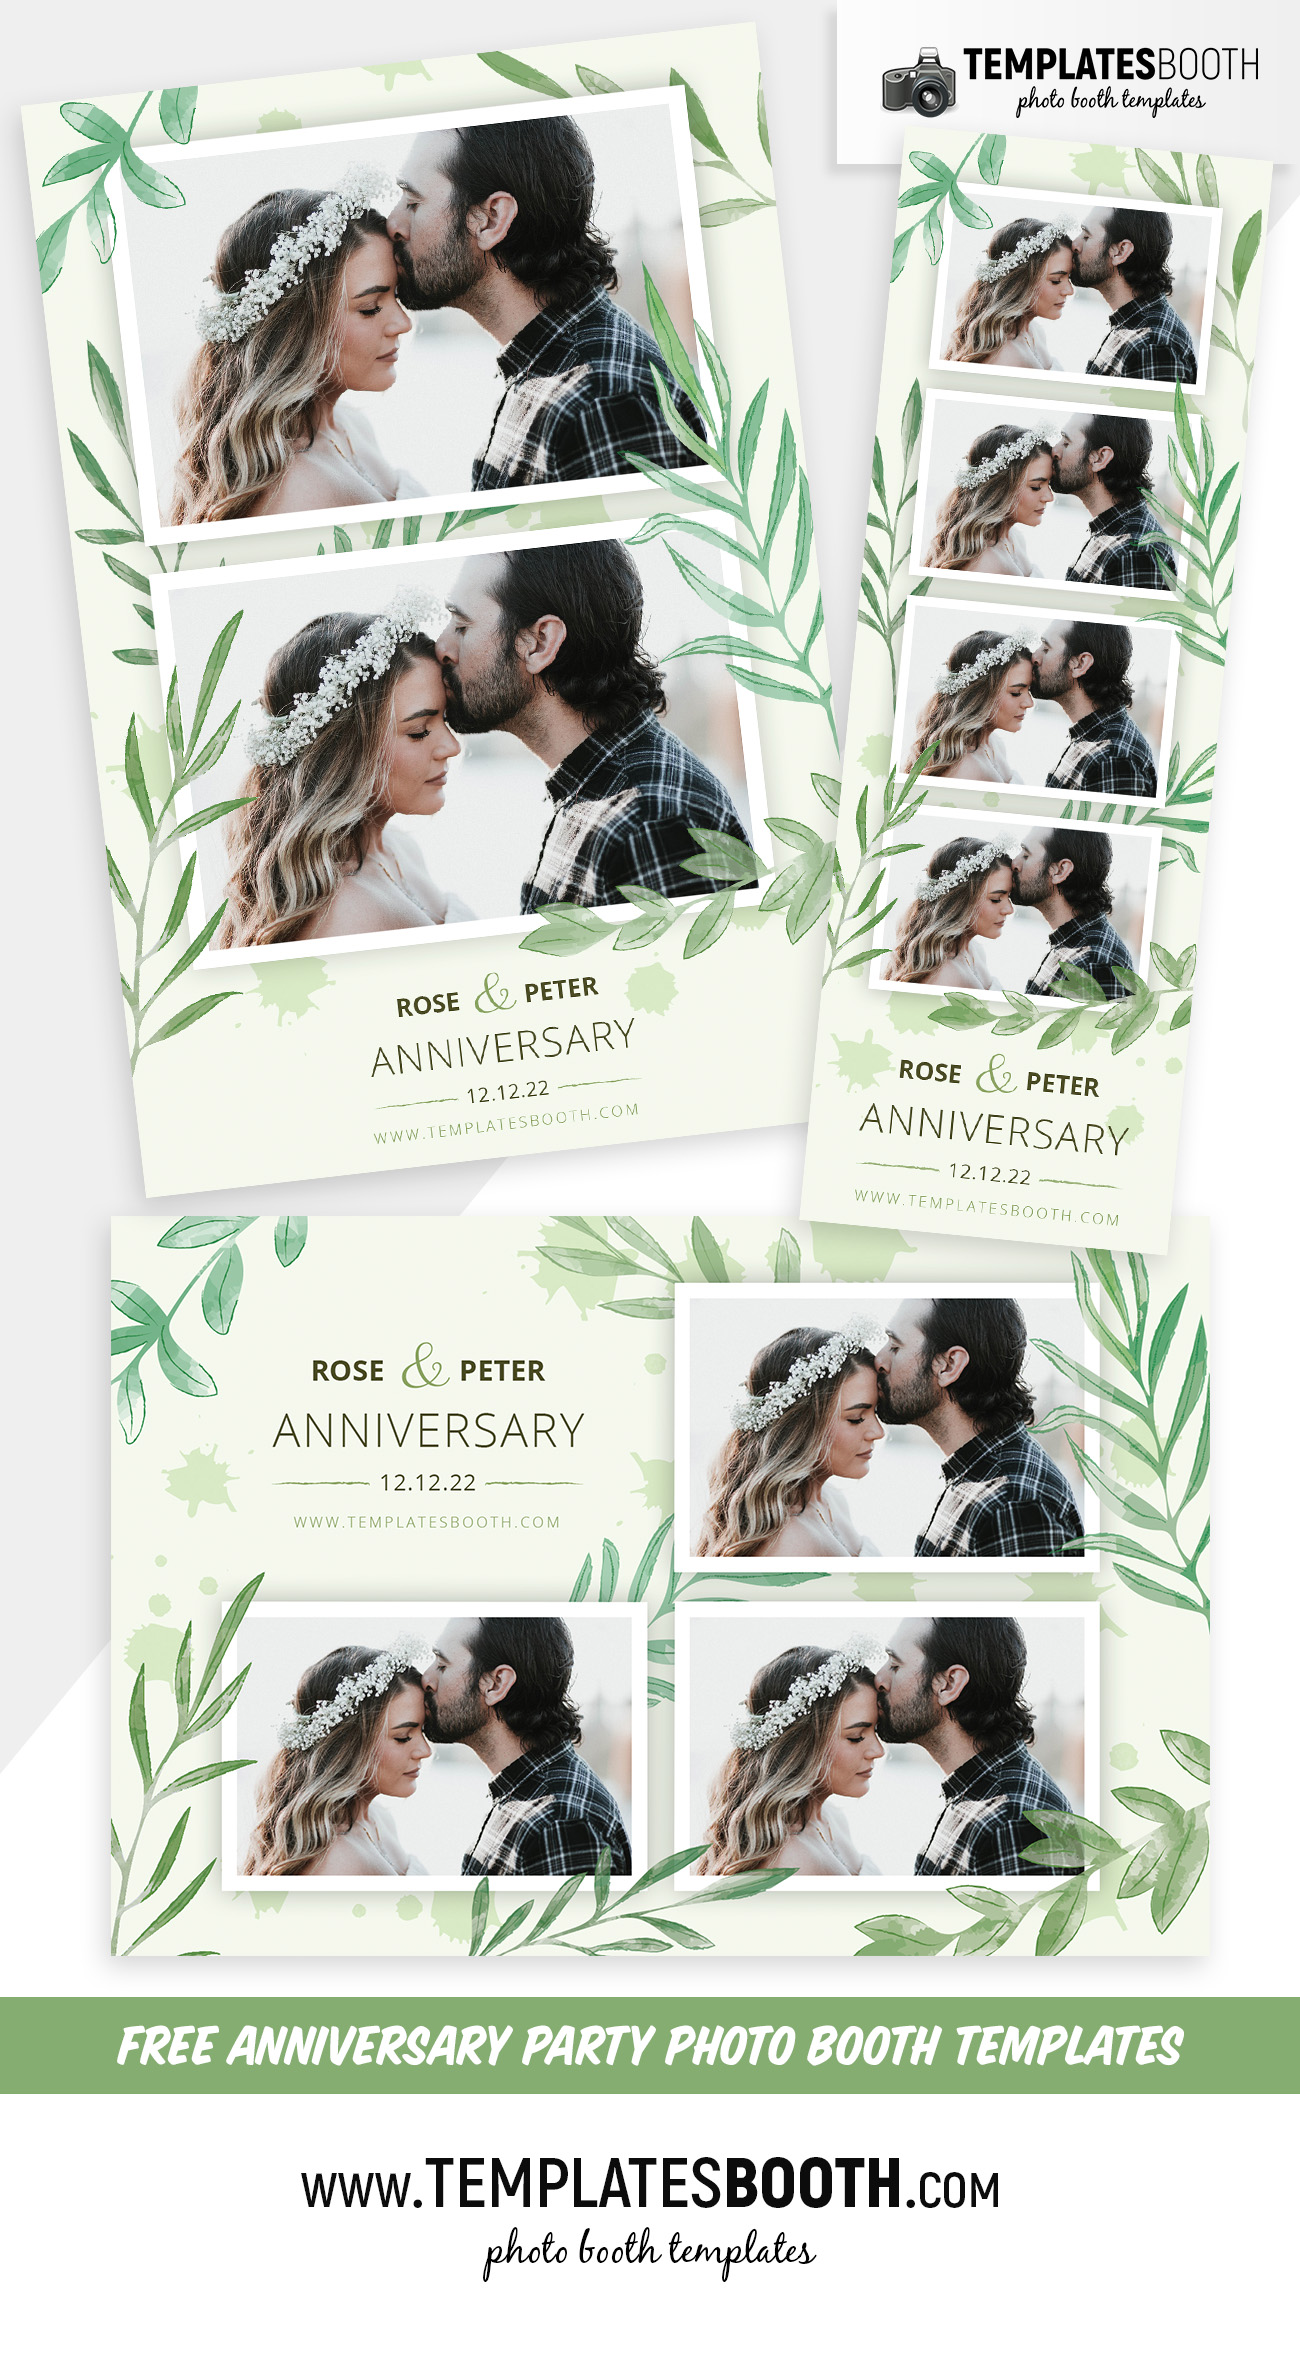 Free Anniversary Party Photo Booth Templates